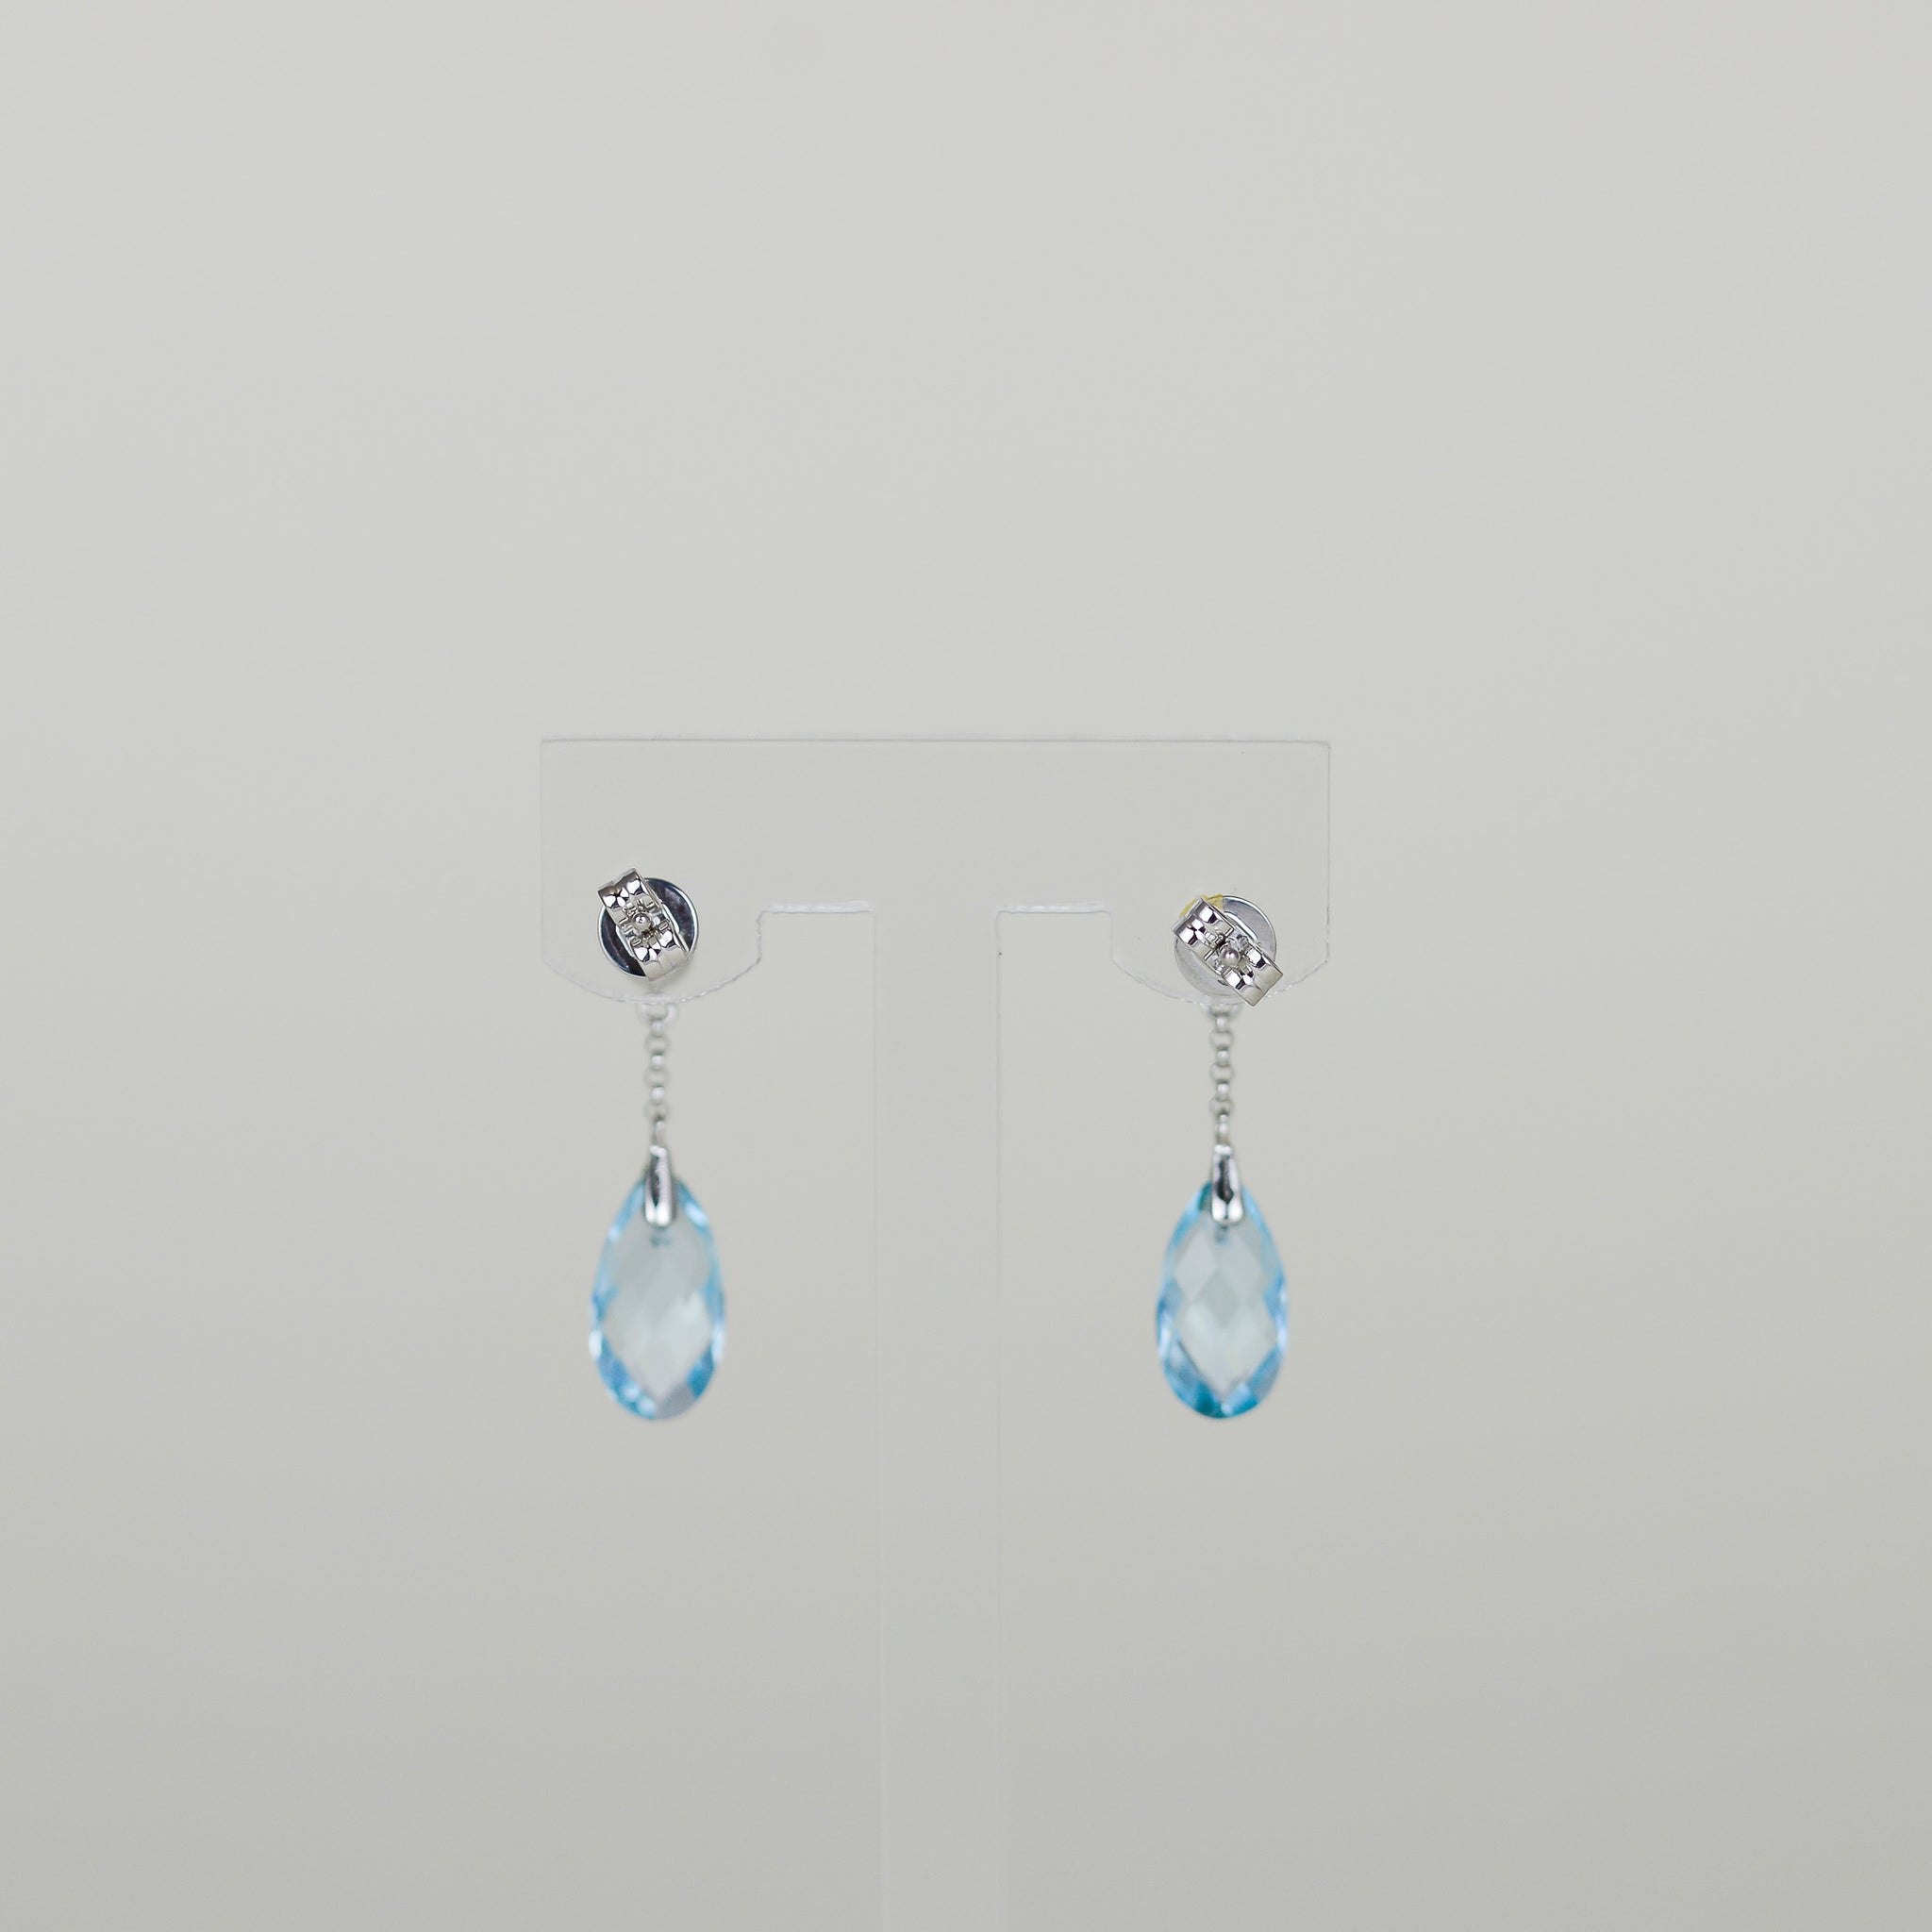 9ct White Gold 4.51ct Briolette Blue Topaz and Pearl Drop Earrings